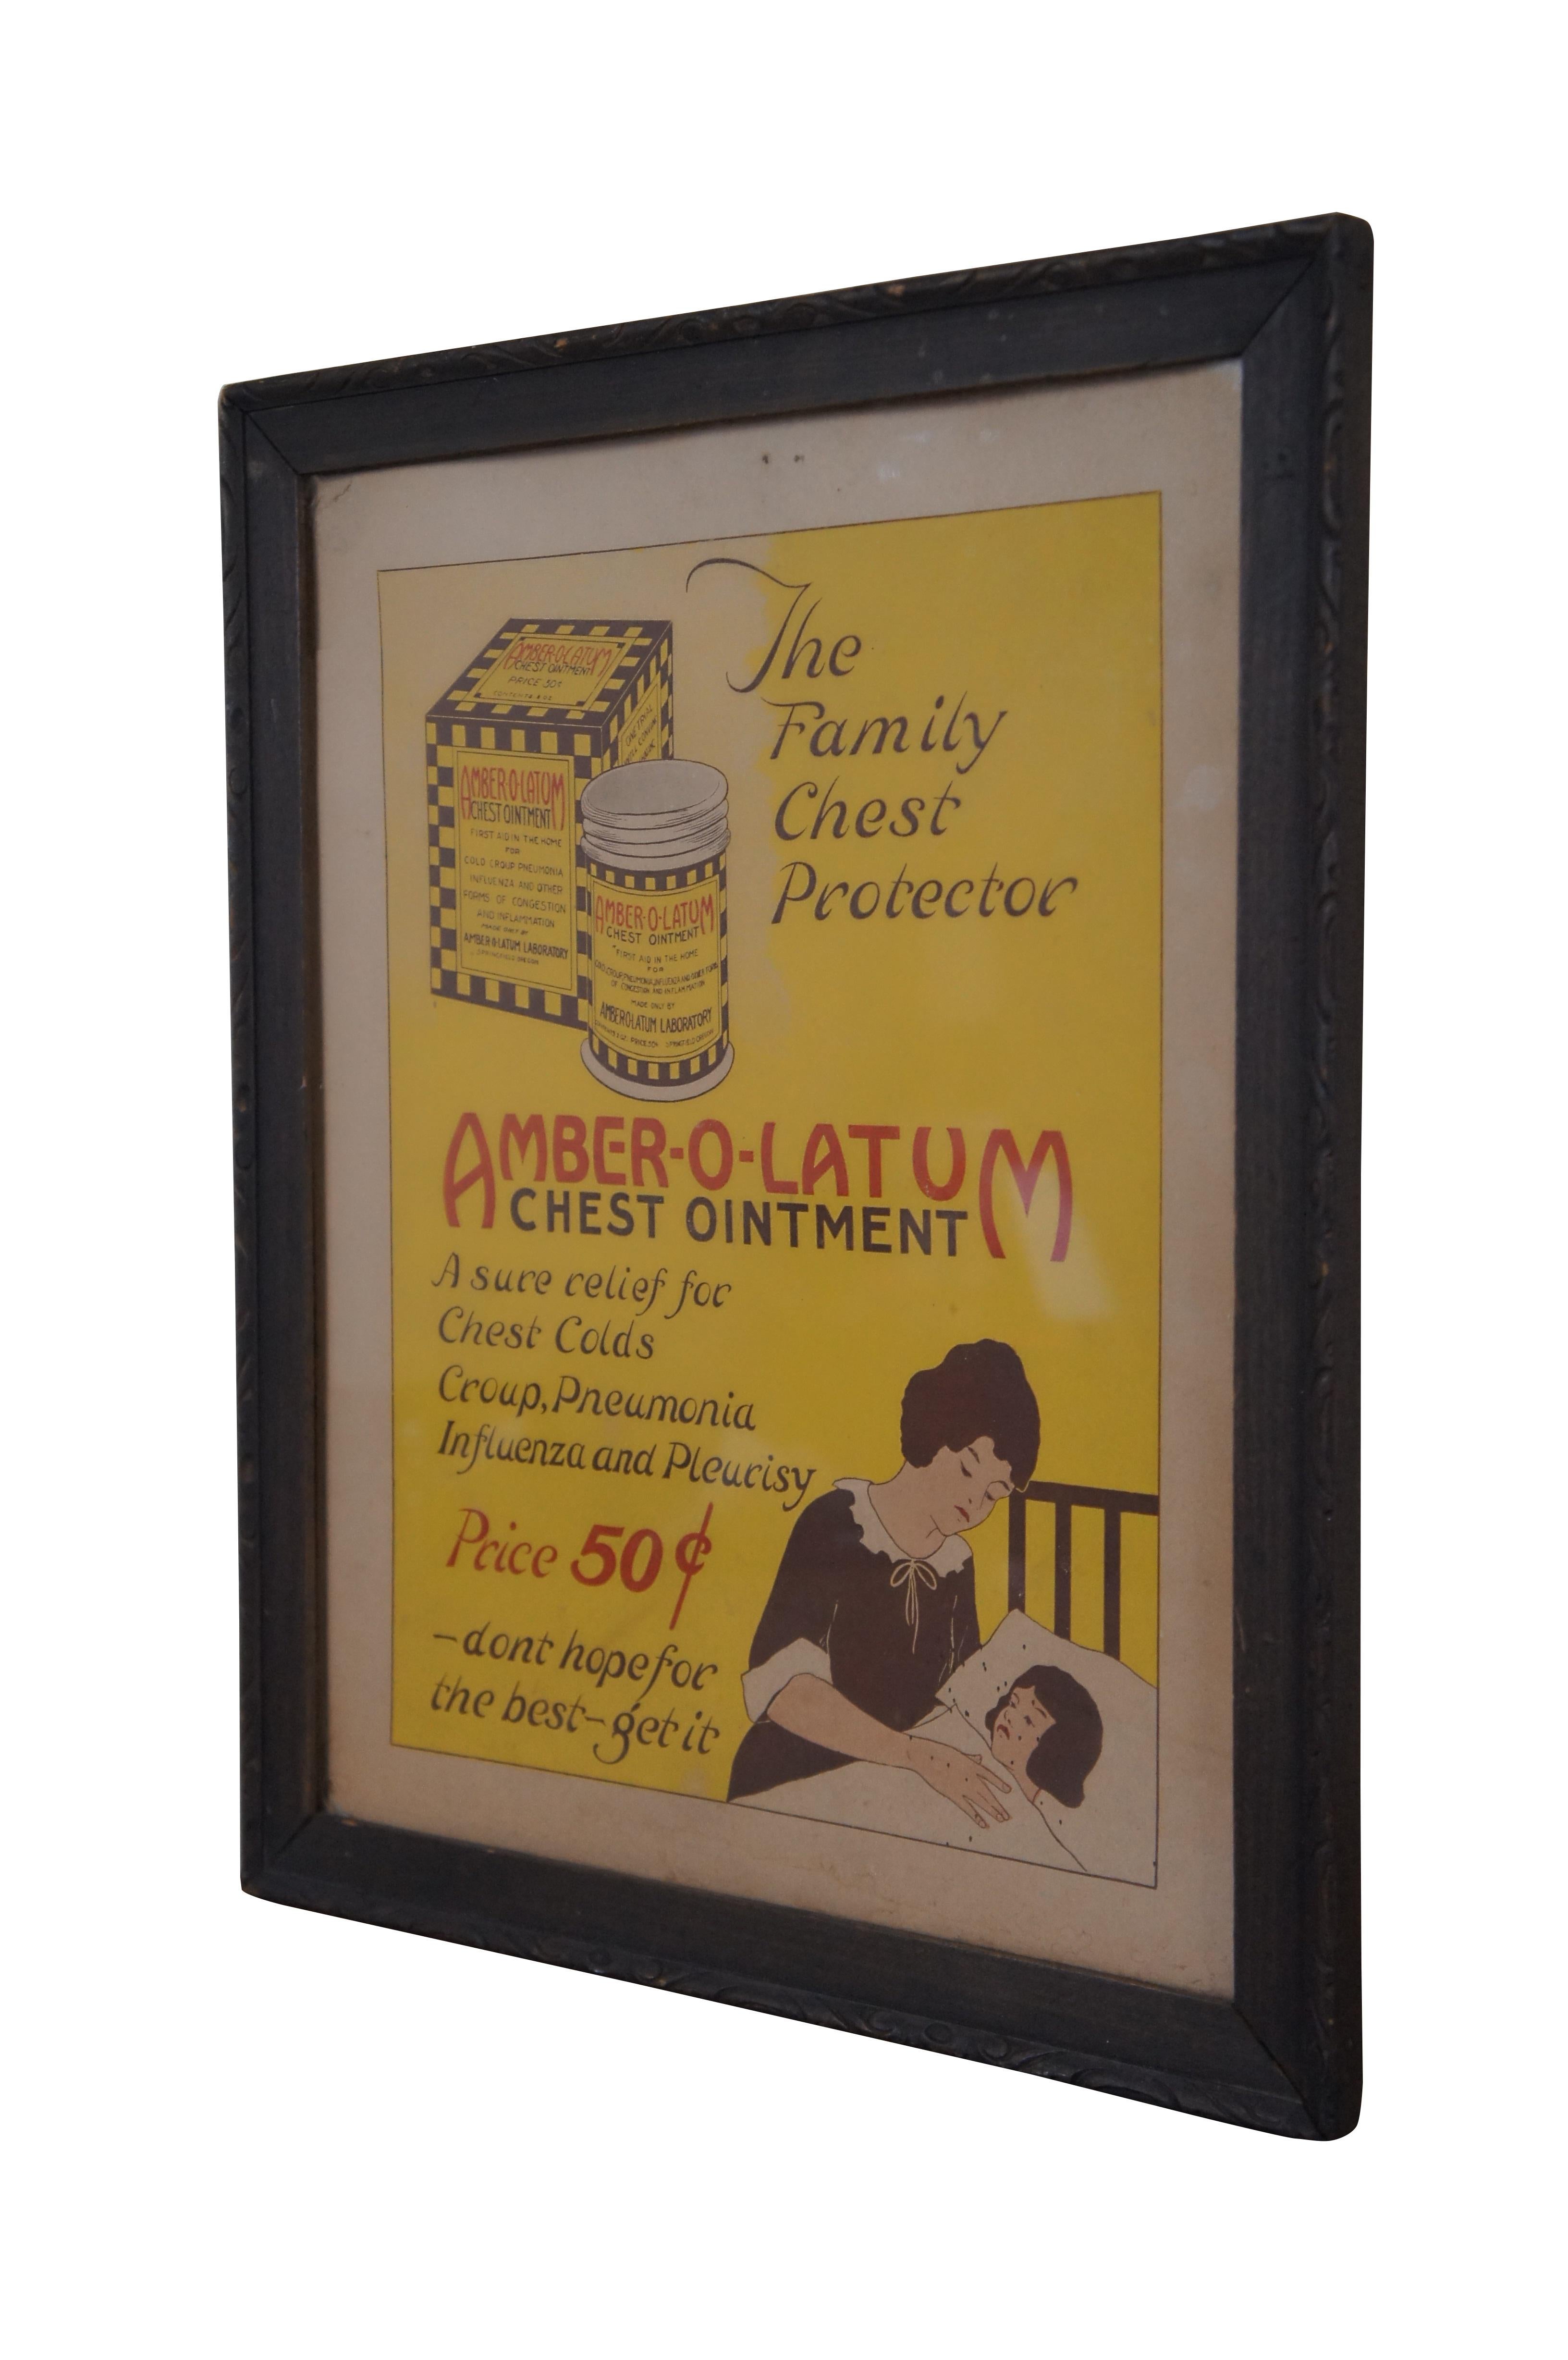 Rare antique medical print ad for Amber-o-Latum Laboratory Chest Ointment. “The Family Chest Protector – A sure relief for Chest Colds, croup, Pneumonia, Influenza, and Pleurisy. Price 50 Cents – Don’t hope for the best – Get